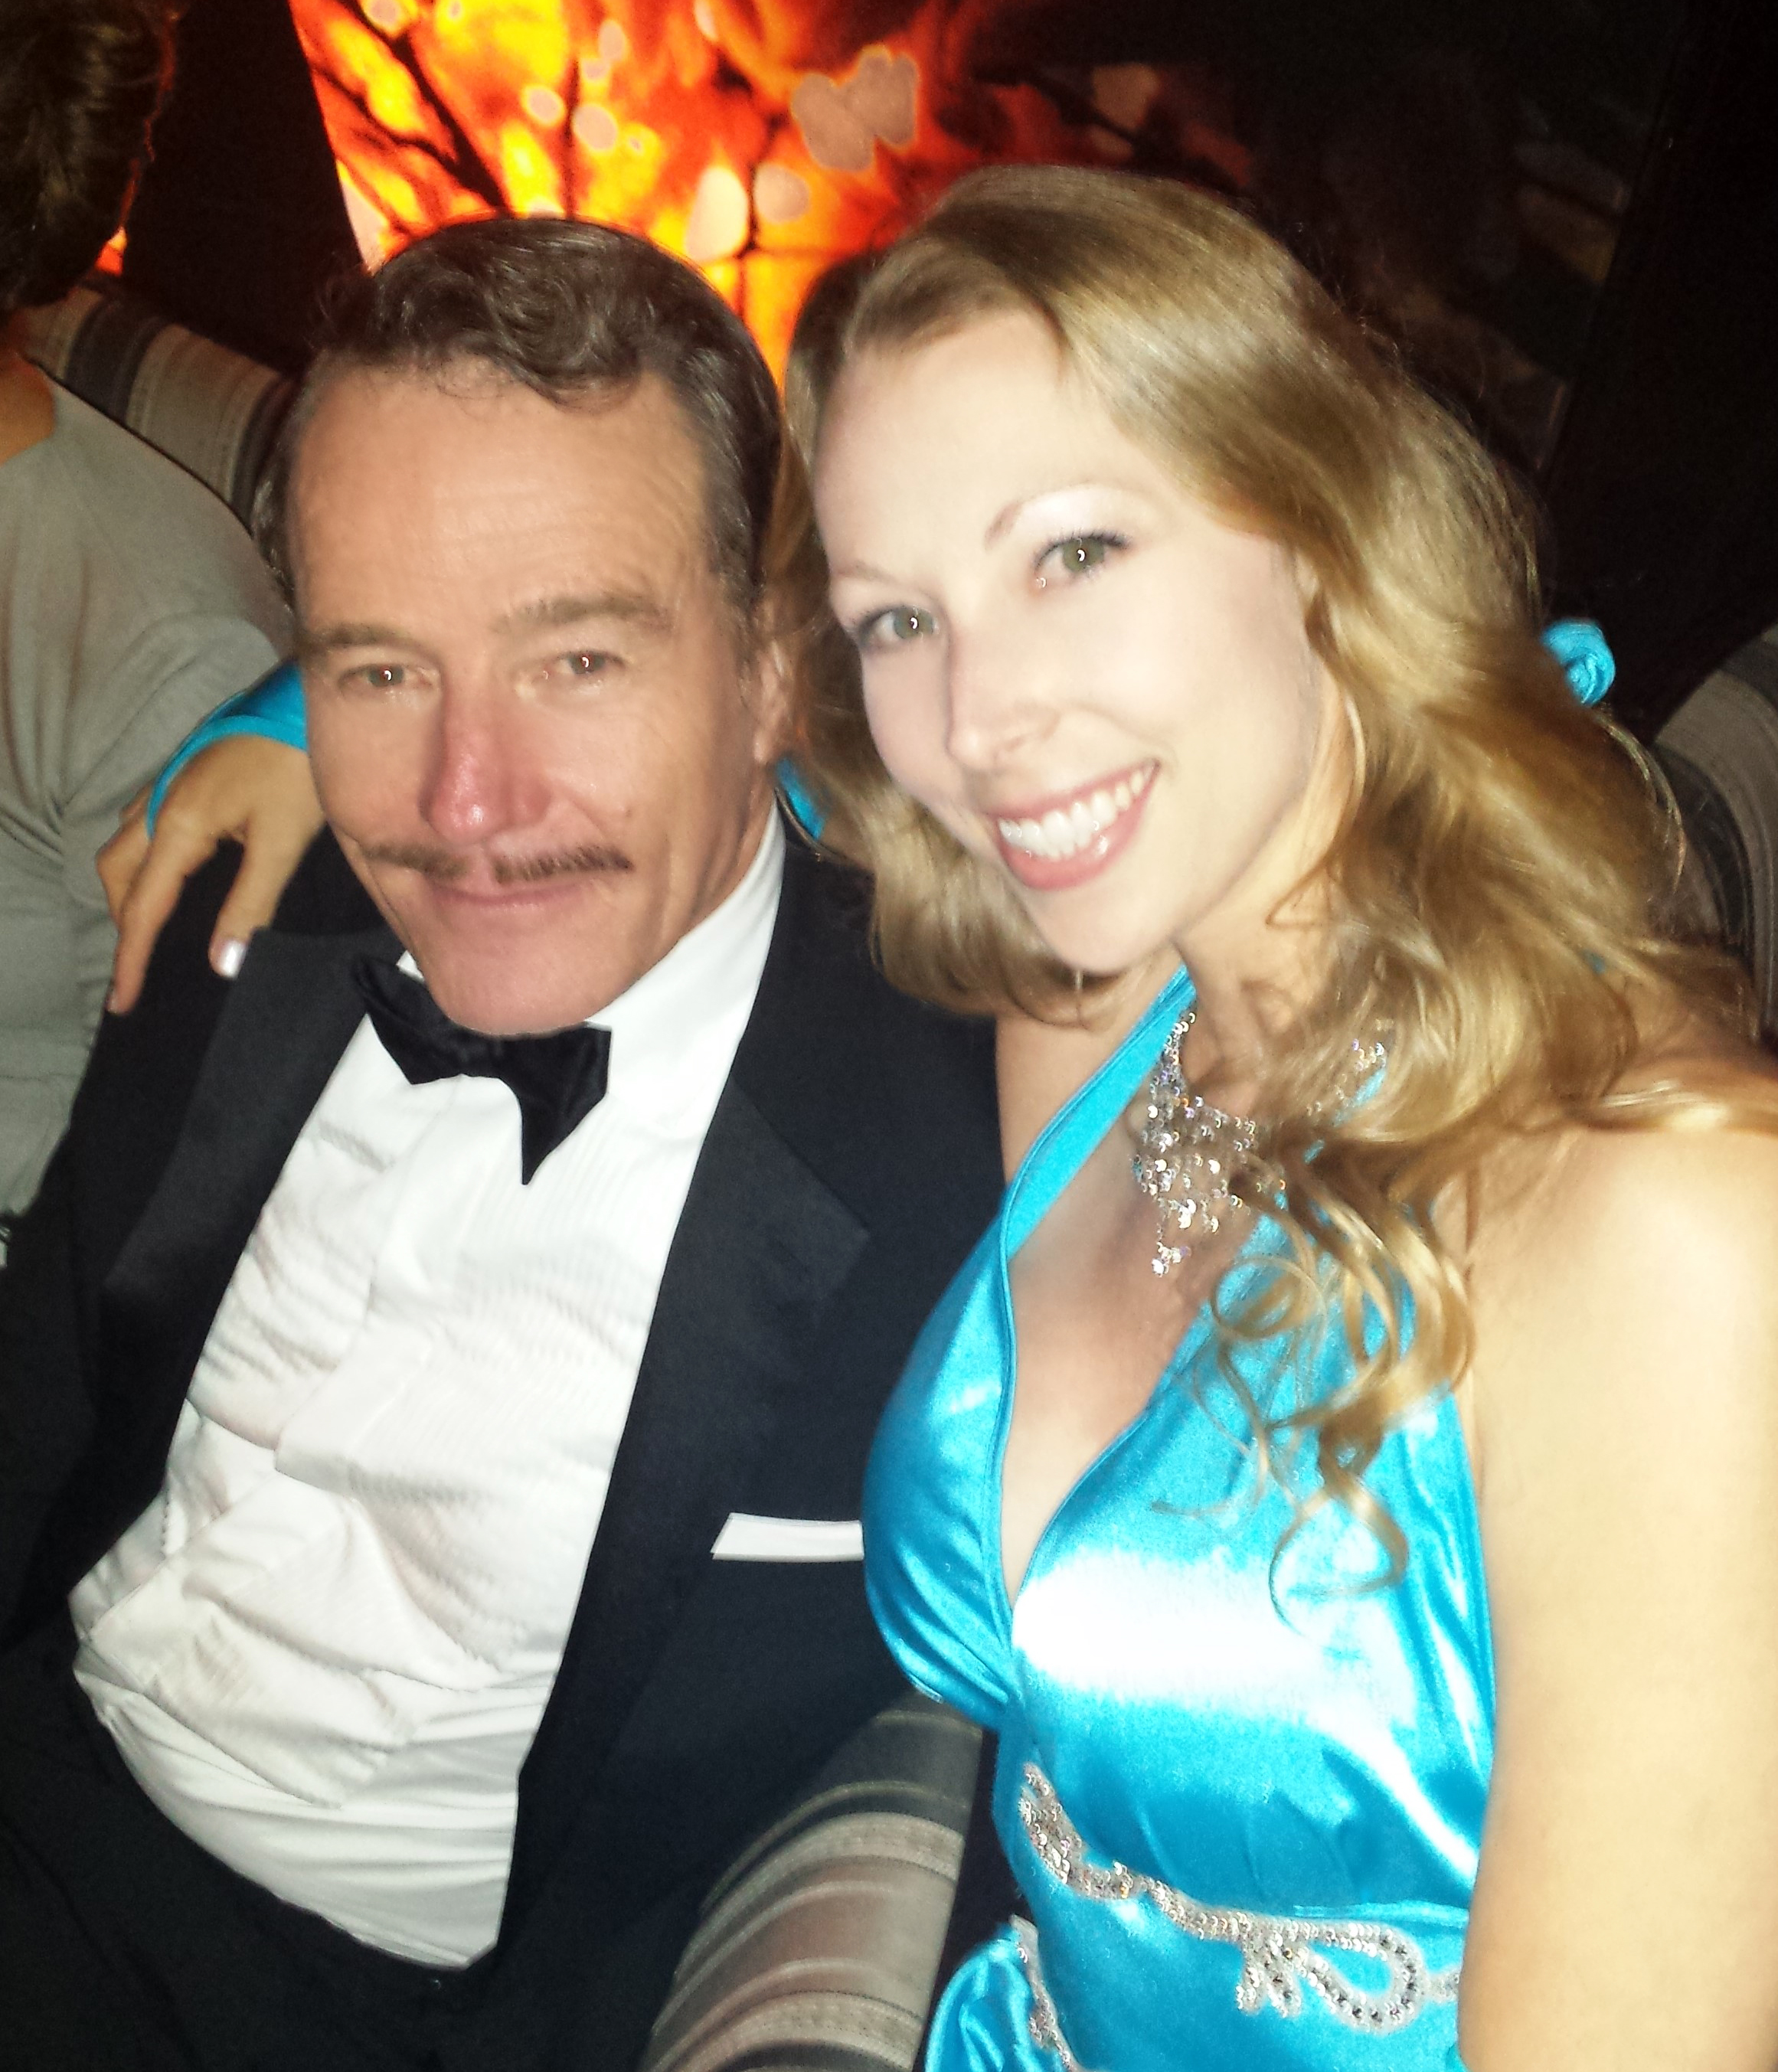 Brian Cranston (Breaking Bad) & Jennifer Day (Hot Package) at the Emmys 2014